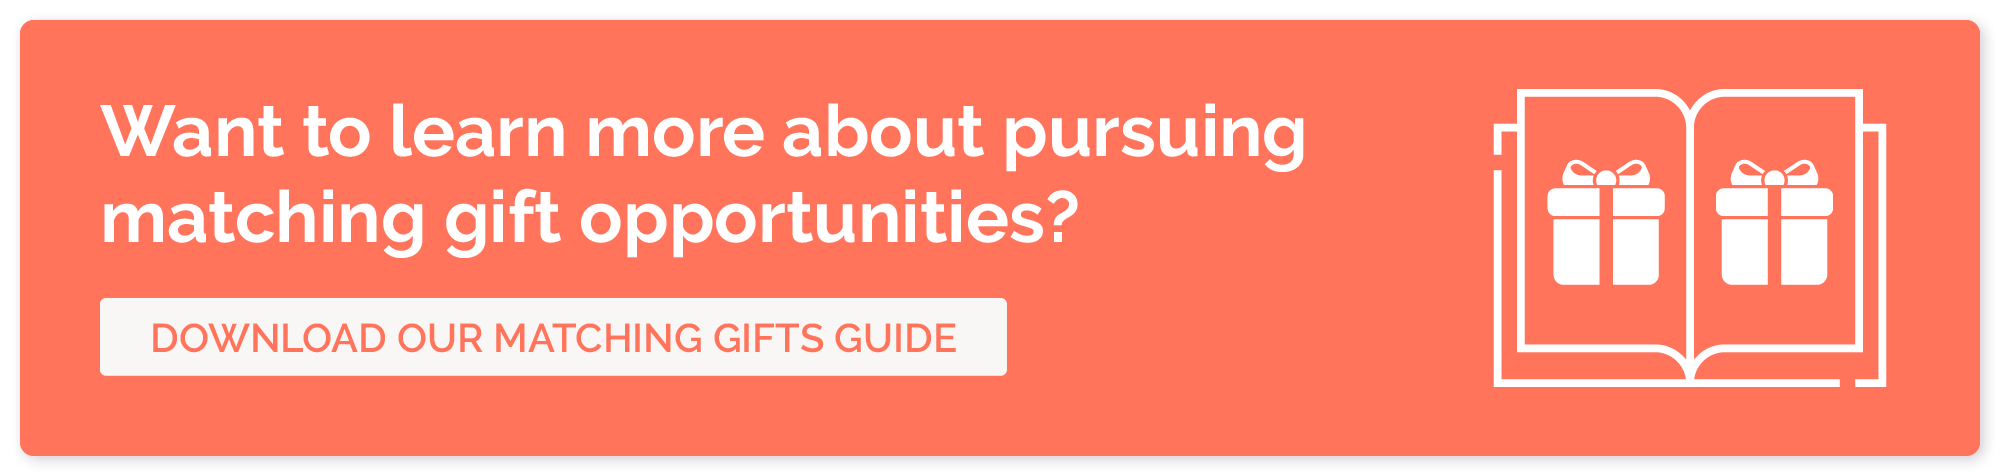 Want to learn more about pursuing matching gift opportunities? Download our matching gifts guide.